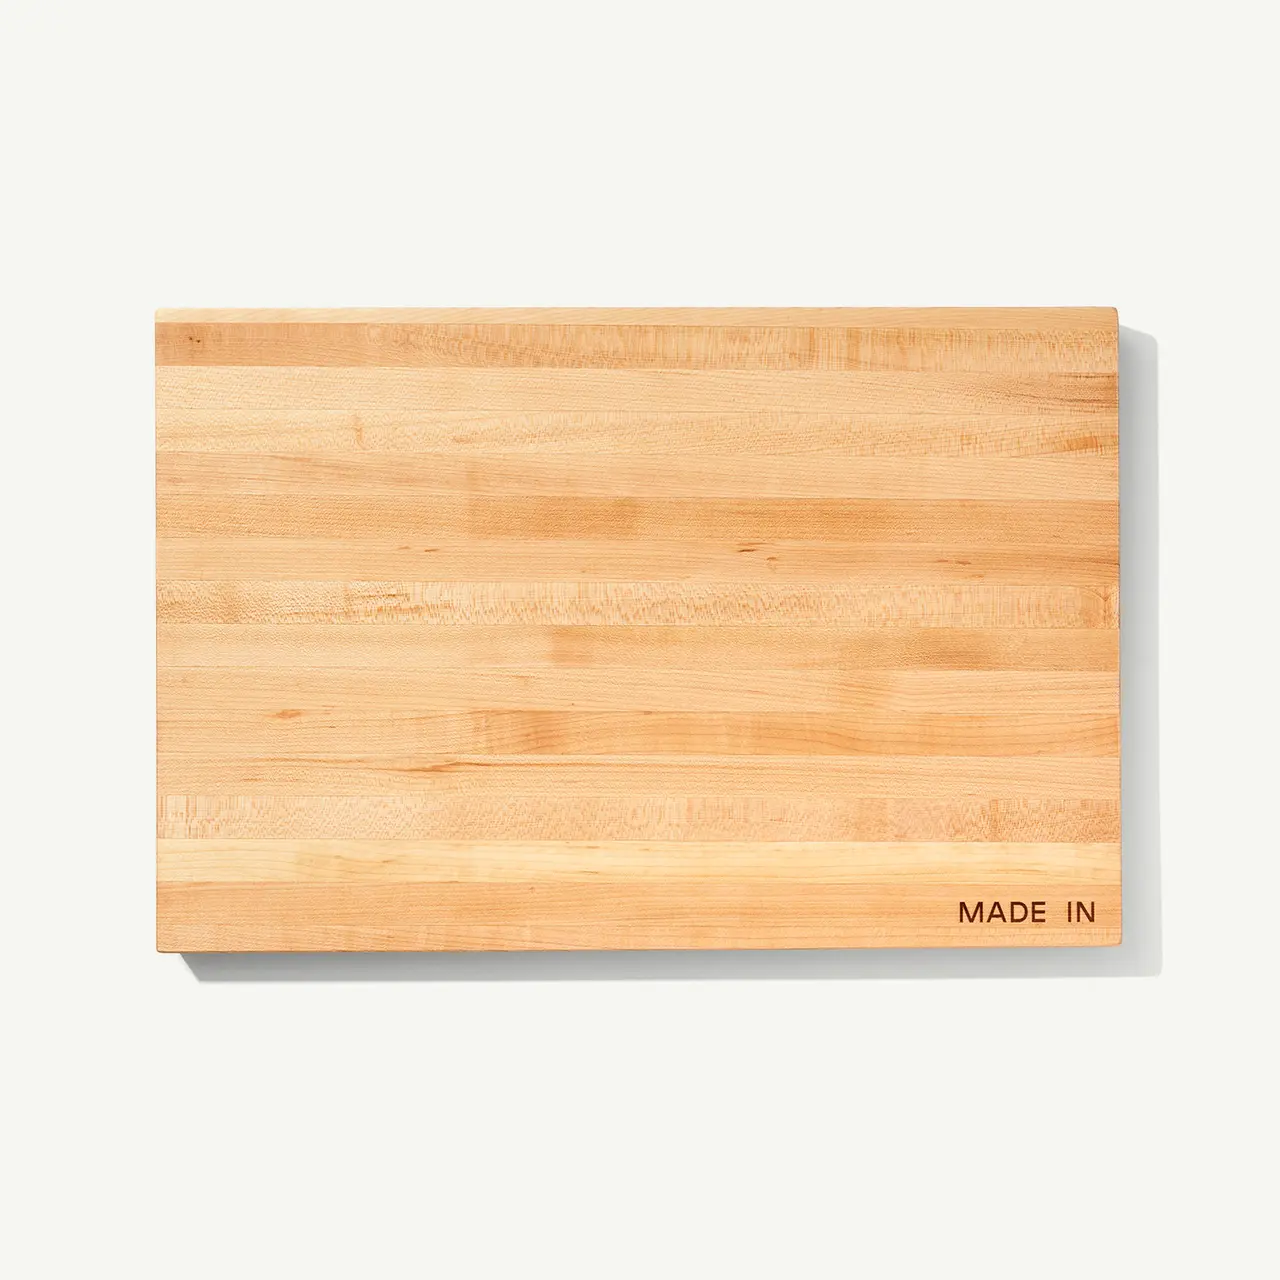 A plain wooden cutting board with visible grain patterns and "MADE IN" text etched in one corner is shown against a white background.